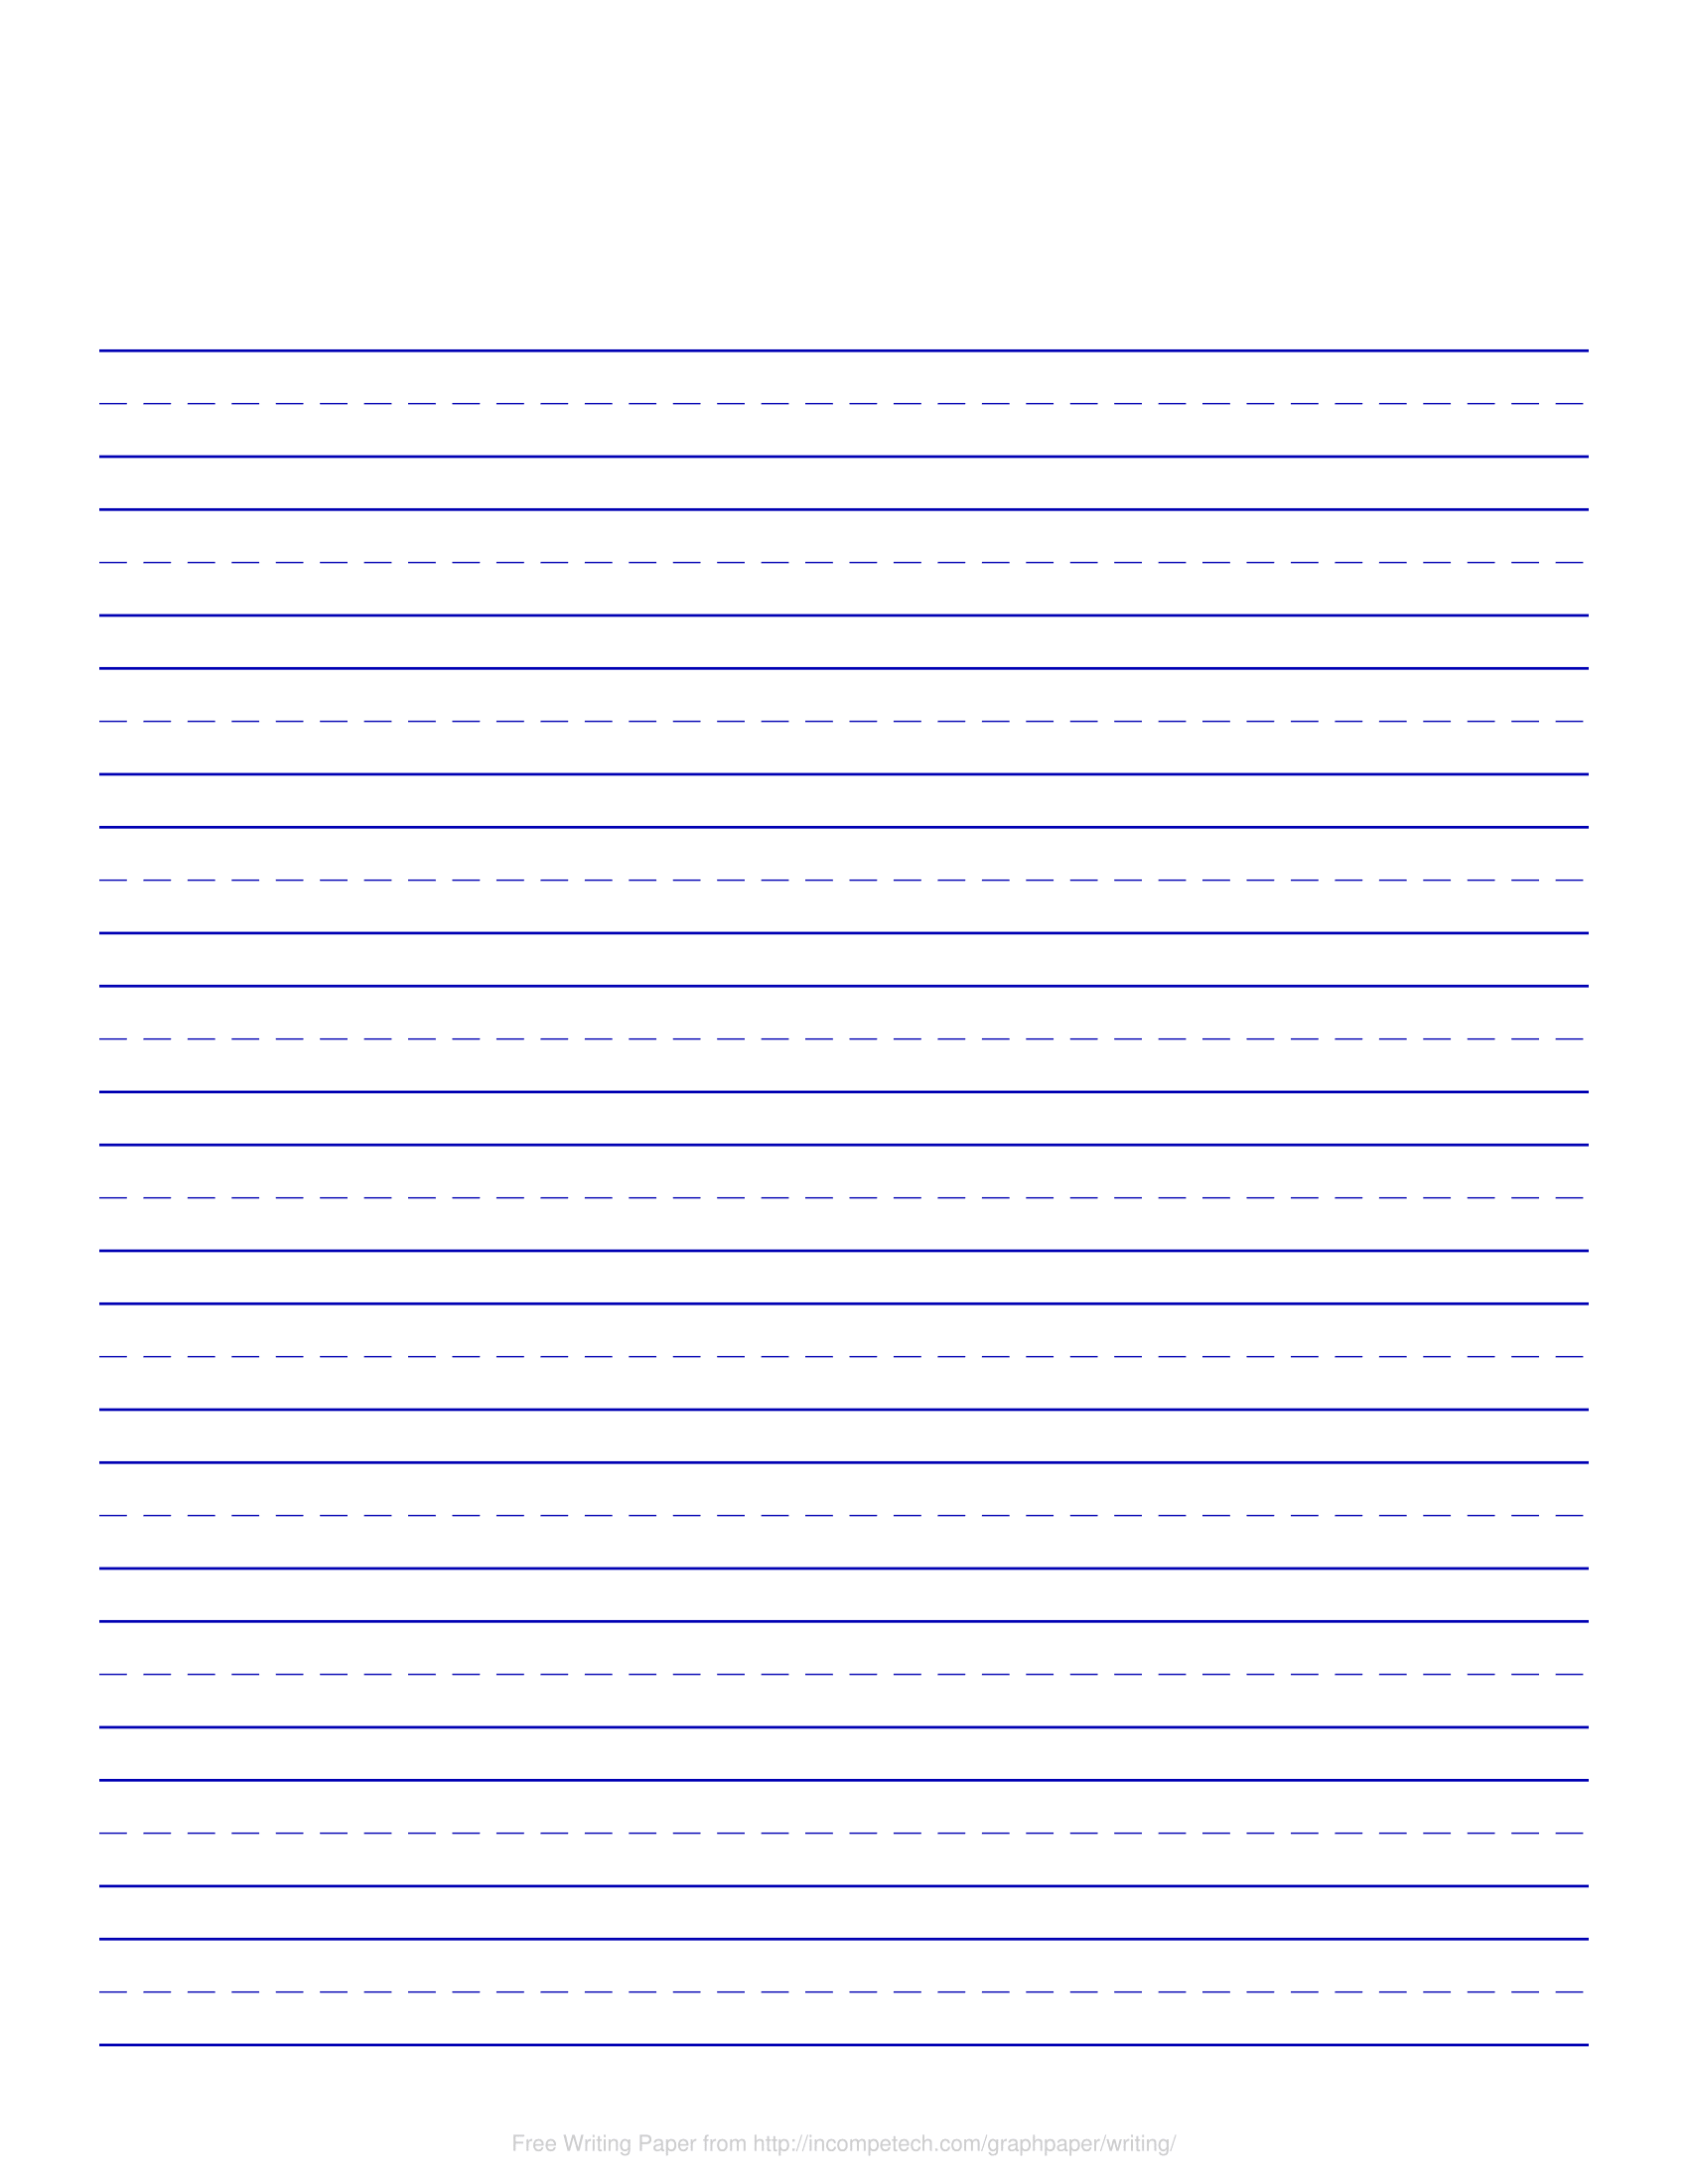 Free Online Graph Paper Writing Paper